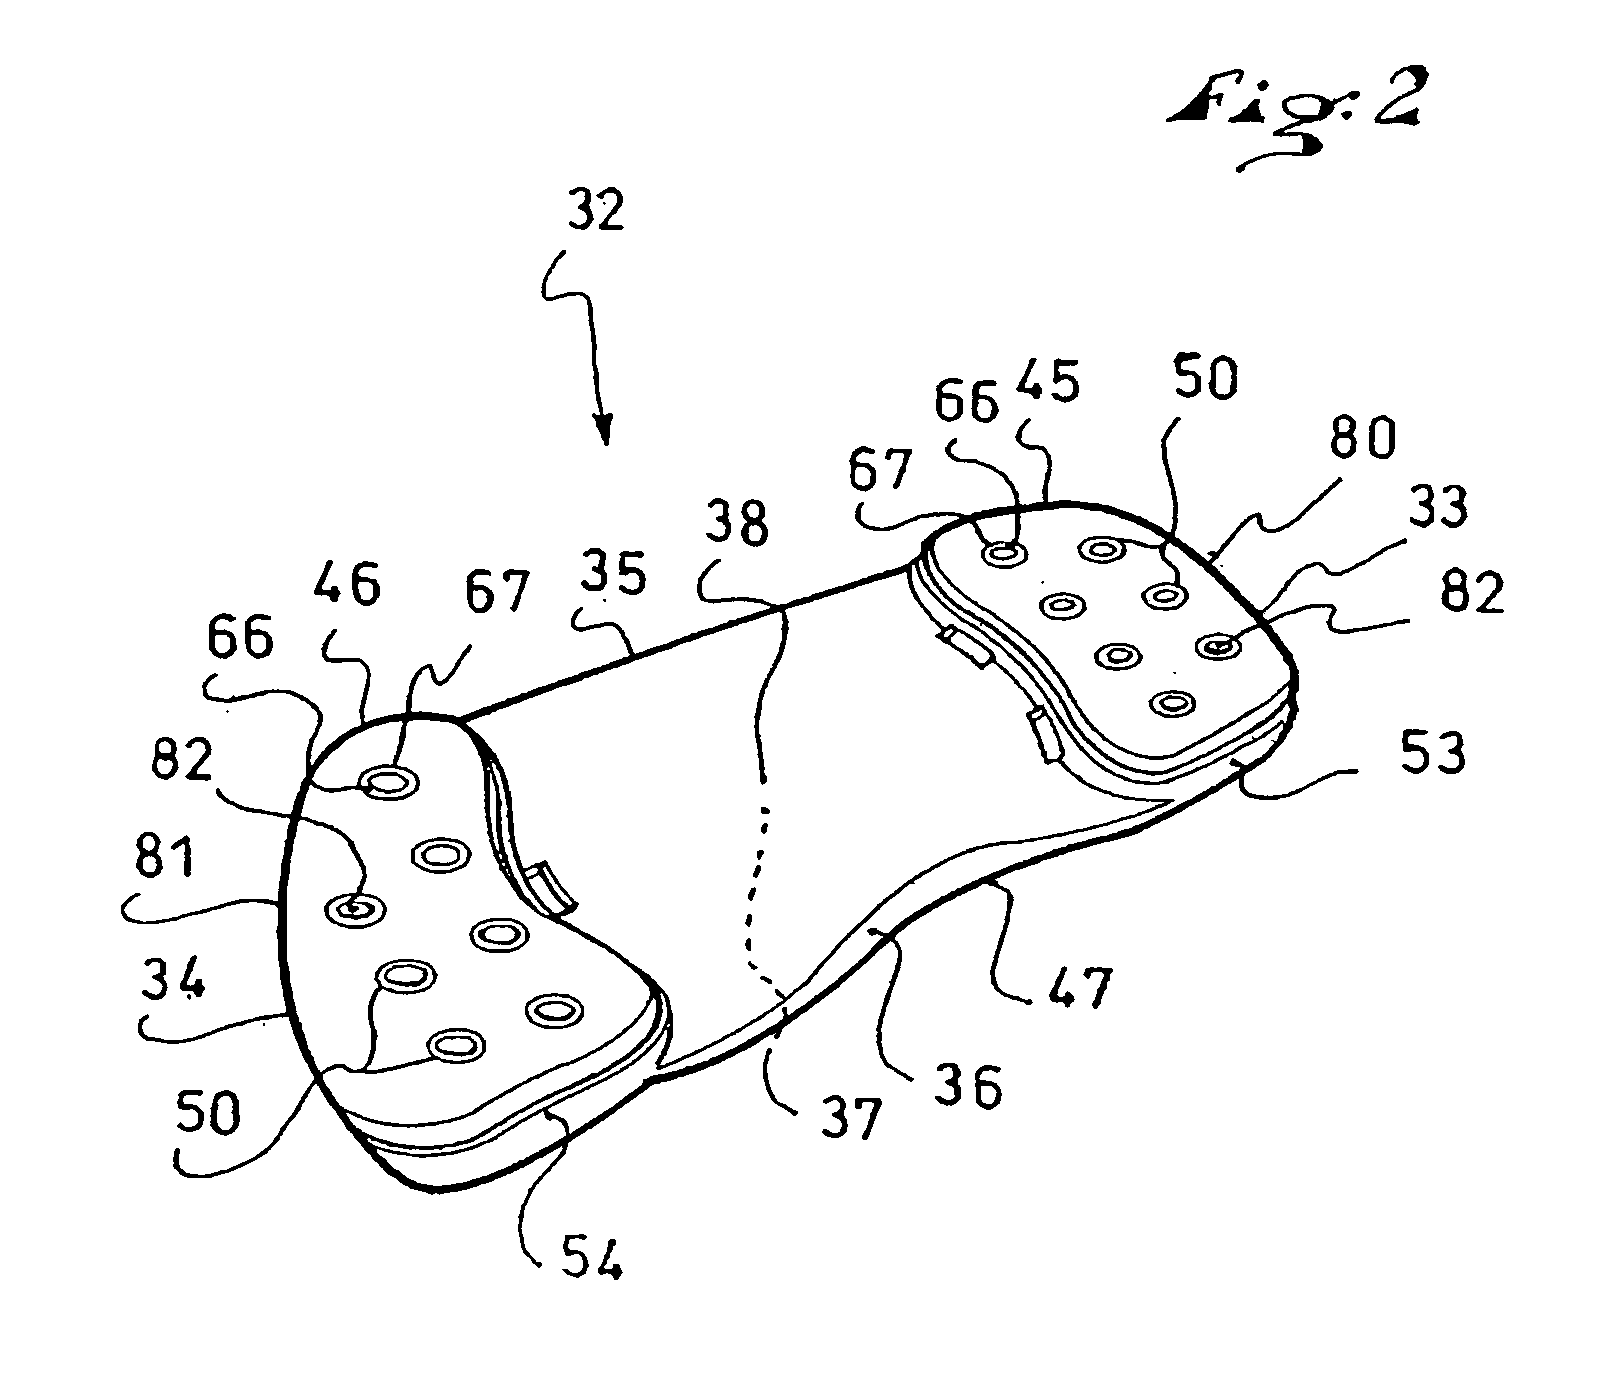 Device for receiving a foot or a boot on a sports apparatus